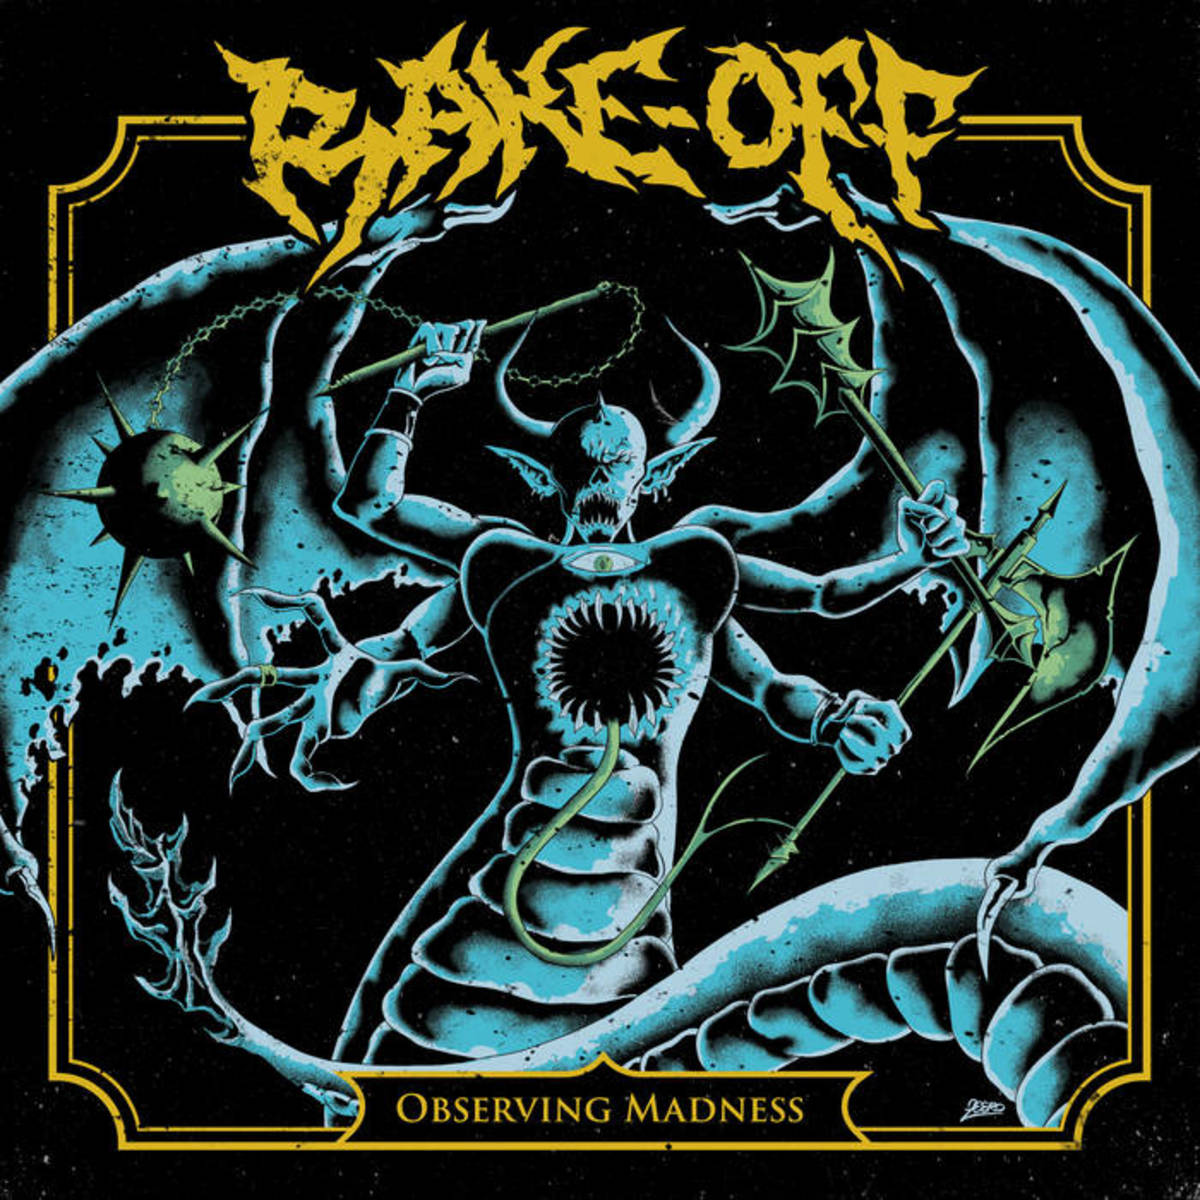 review-of-the-album-observing-madness-by-italian-thrash-metal-band-rake-off